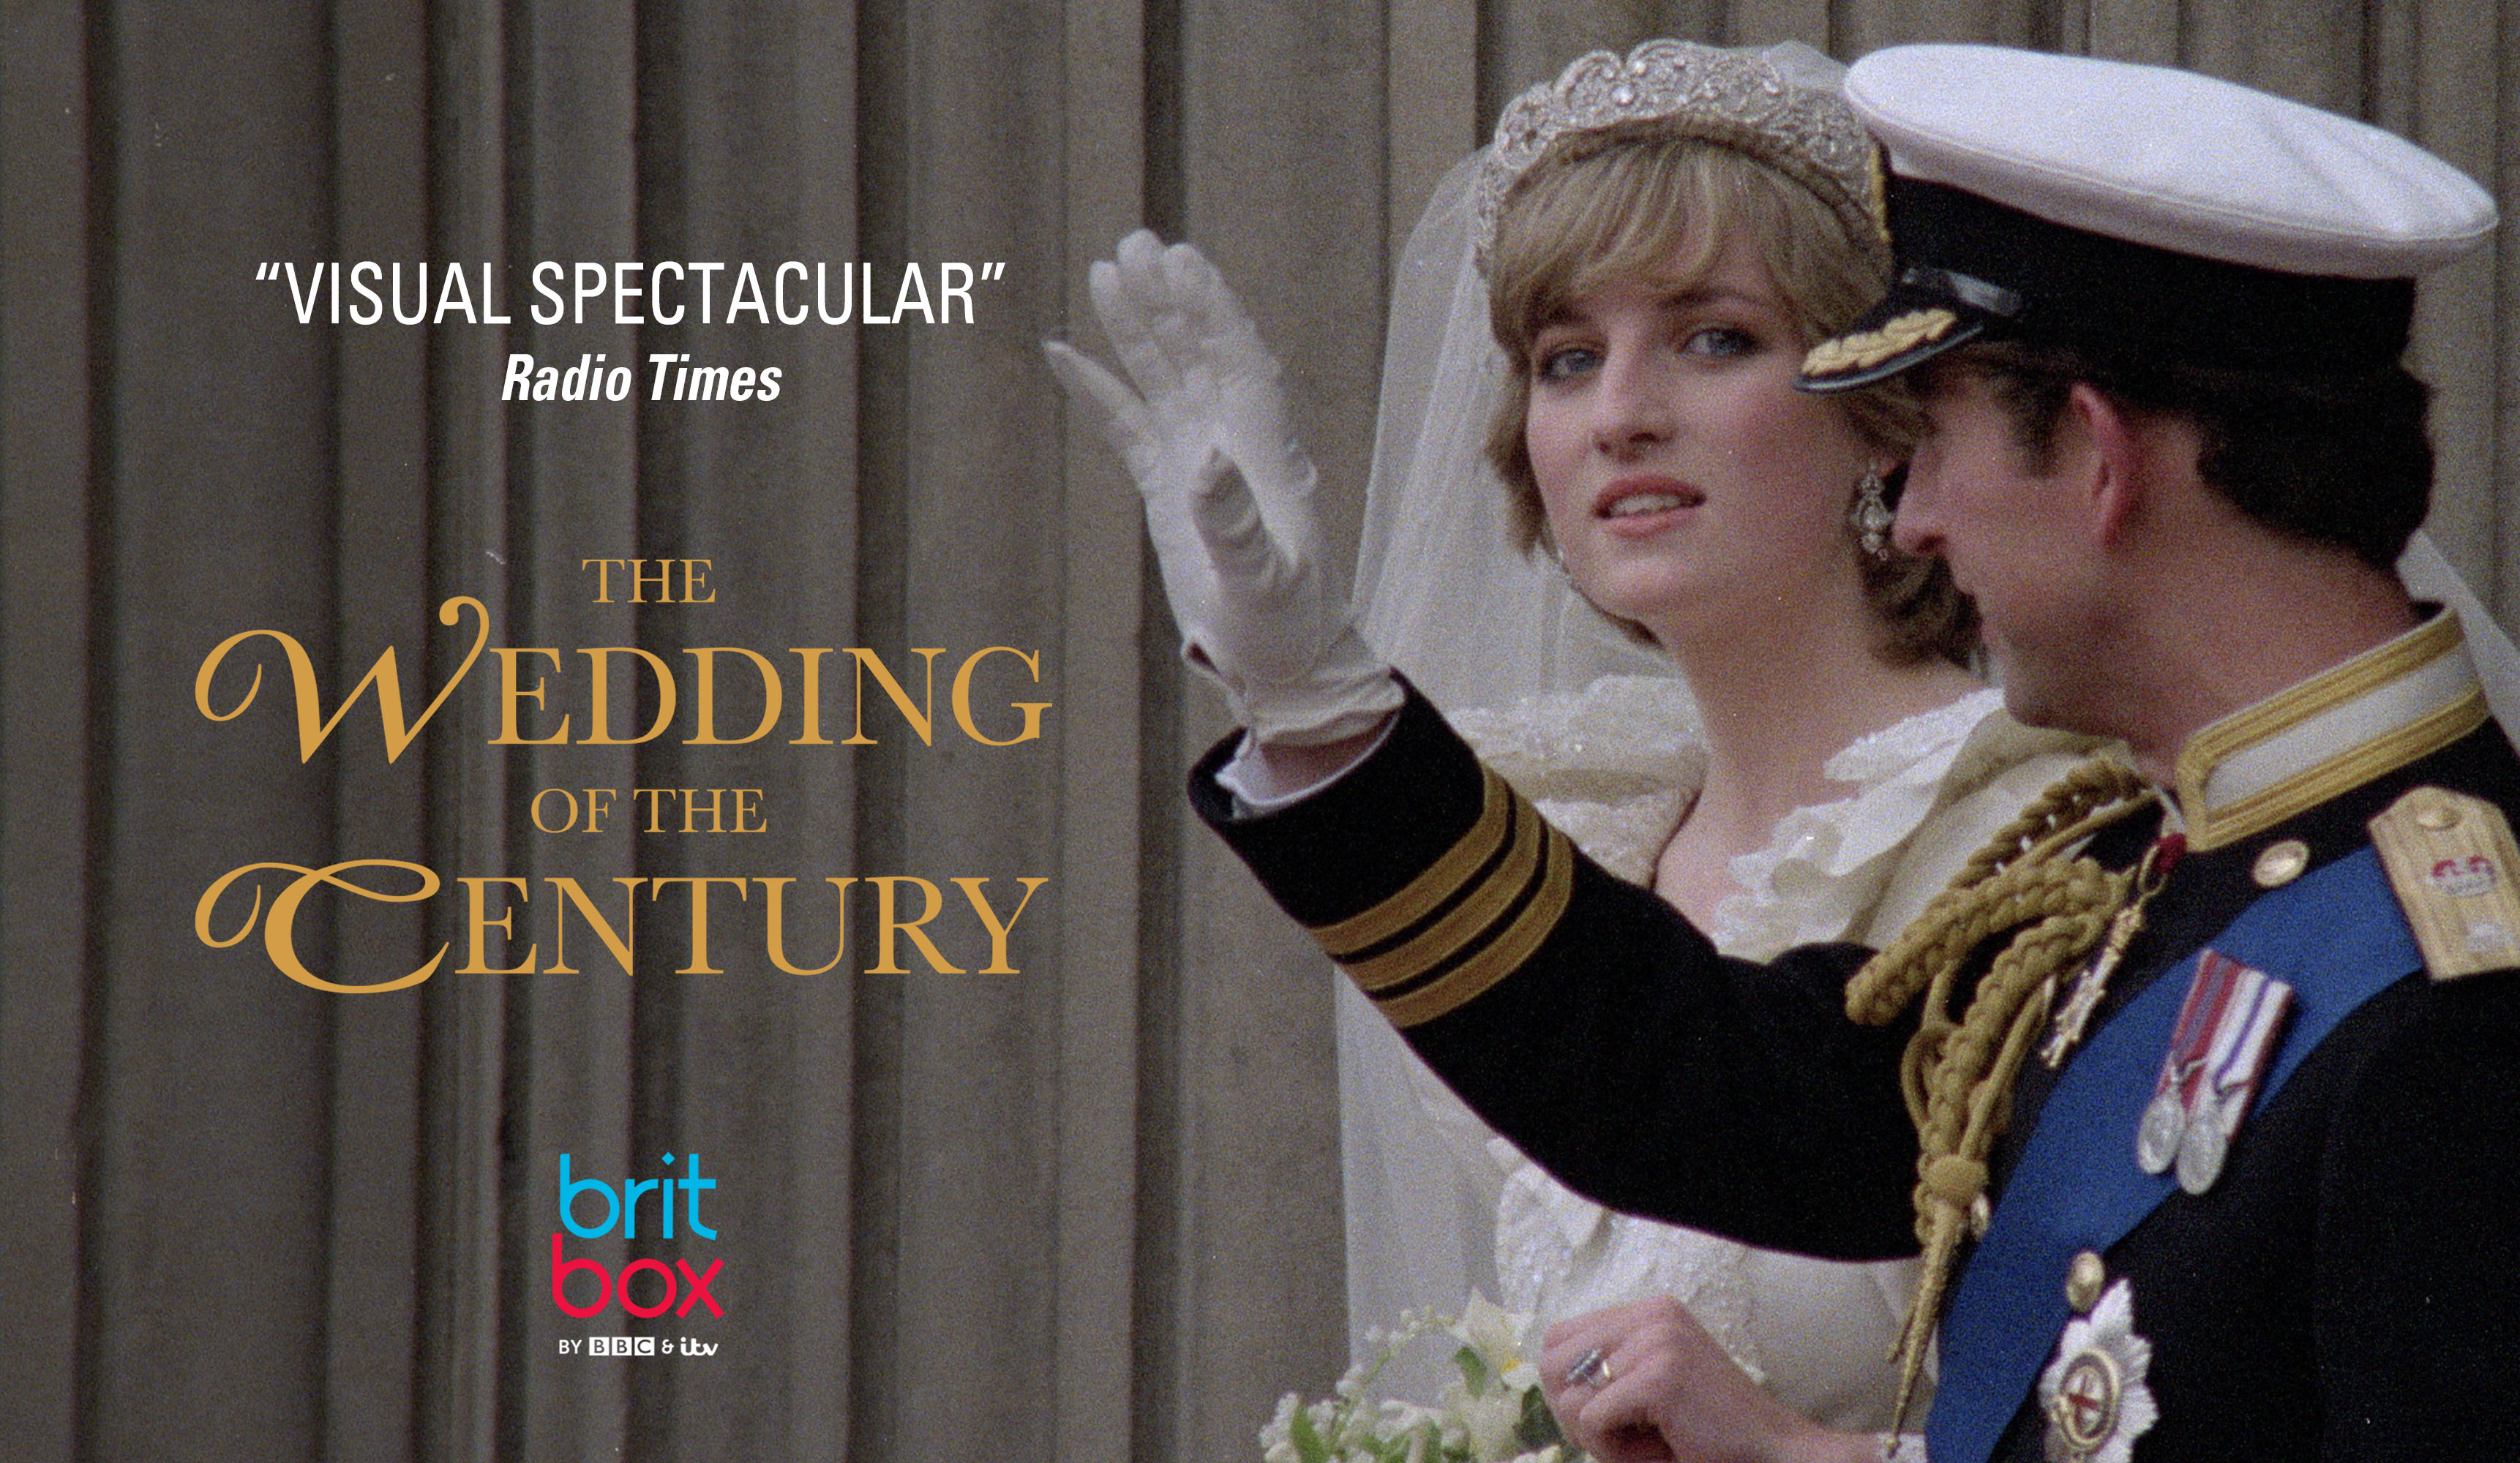 Britbox, Lady Di And The Wedding of The Century!